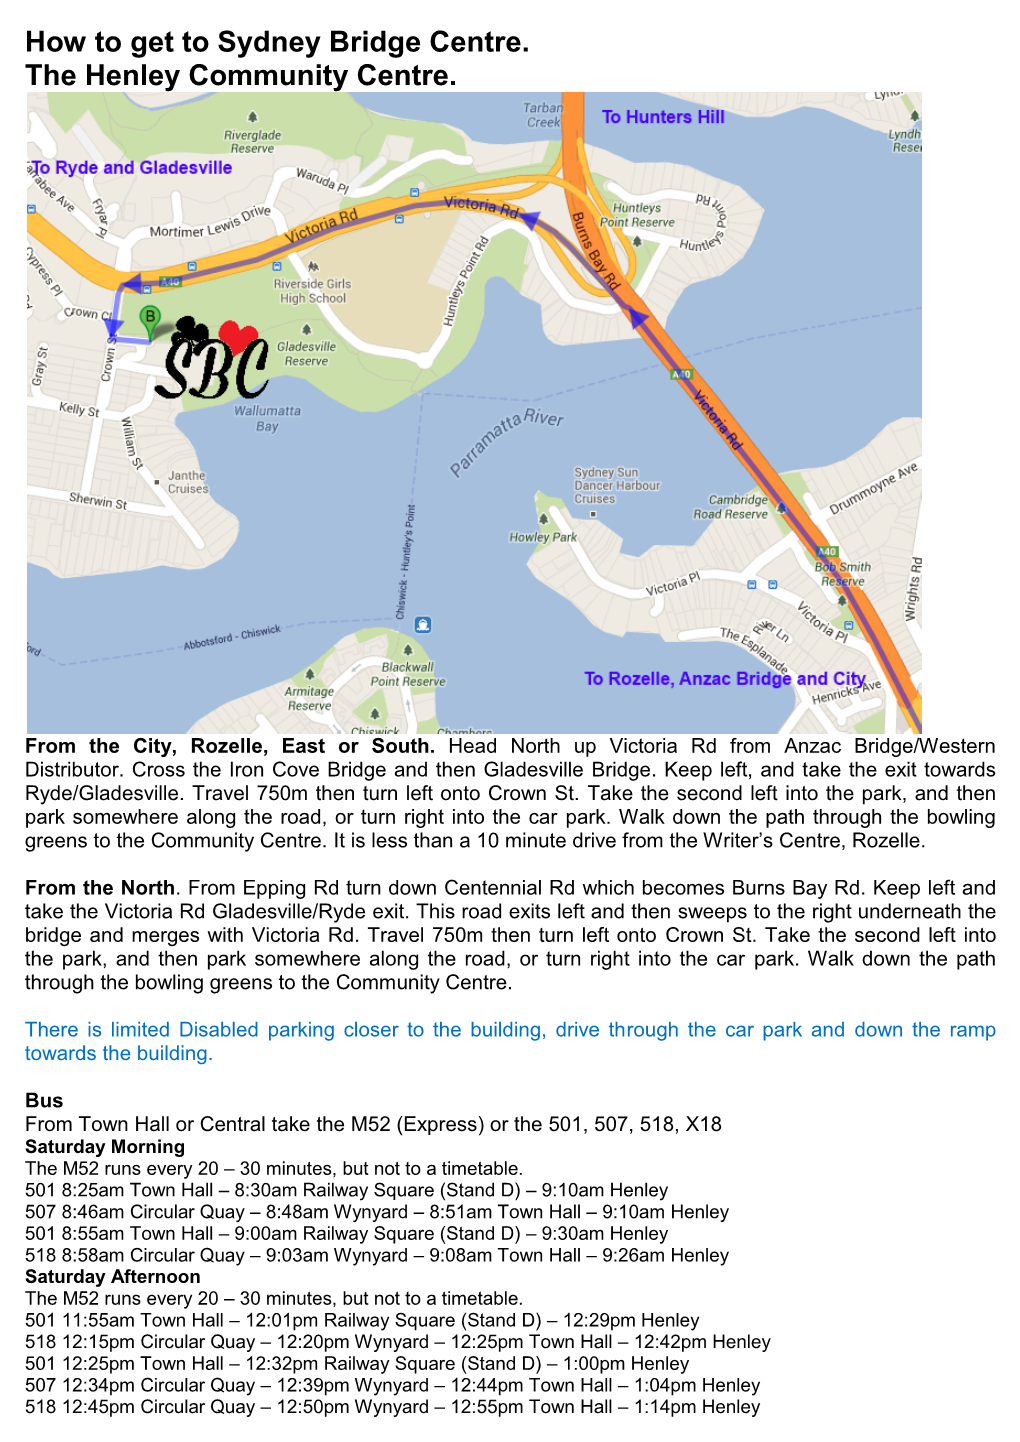 How to Get to Sydney Bridge Centre. the Henley Community Centre